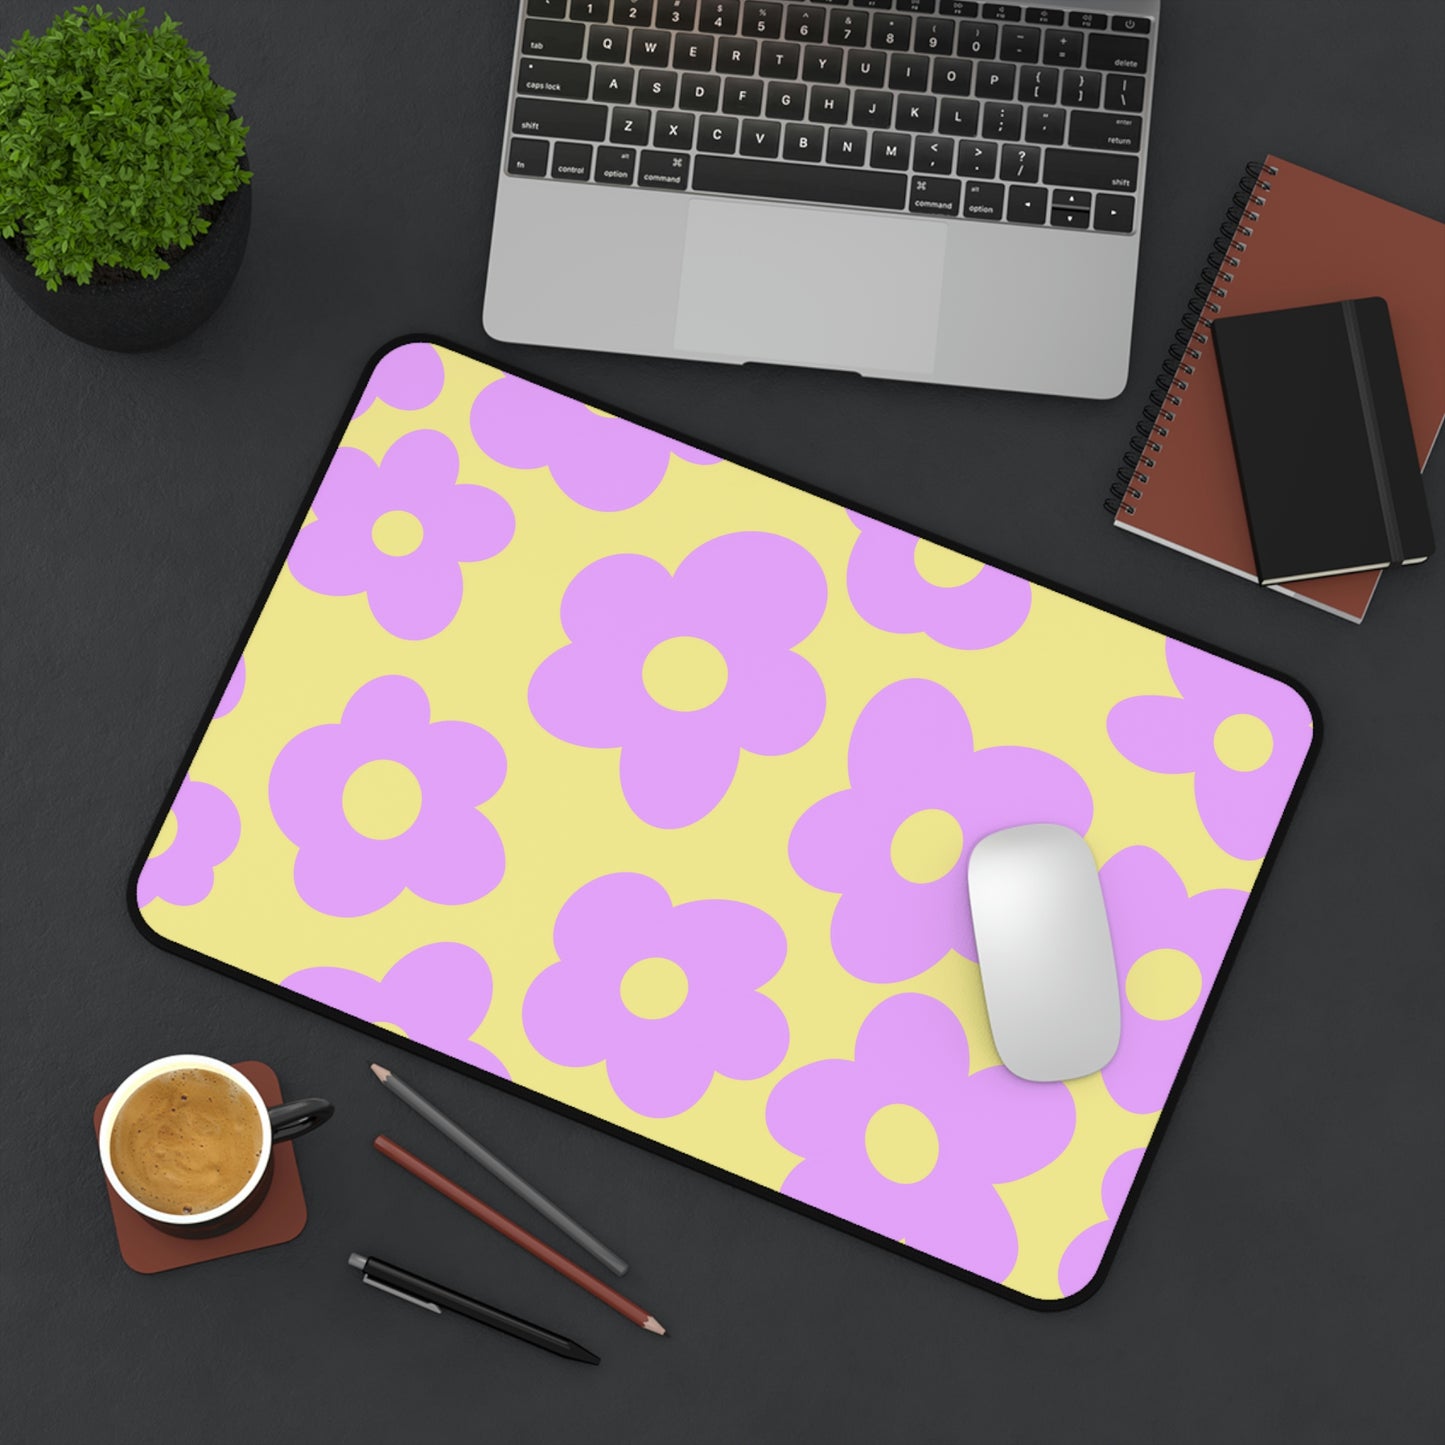 A 12" x 18" desk mat with purple flowers on a yellow background sitting at an angle.